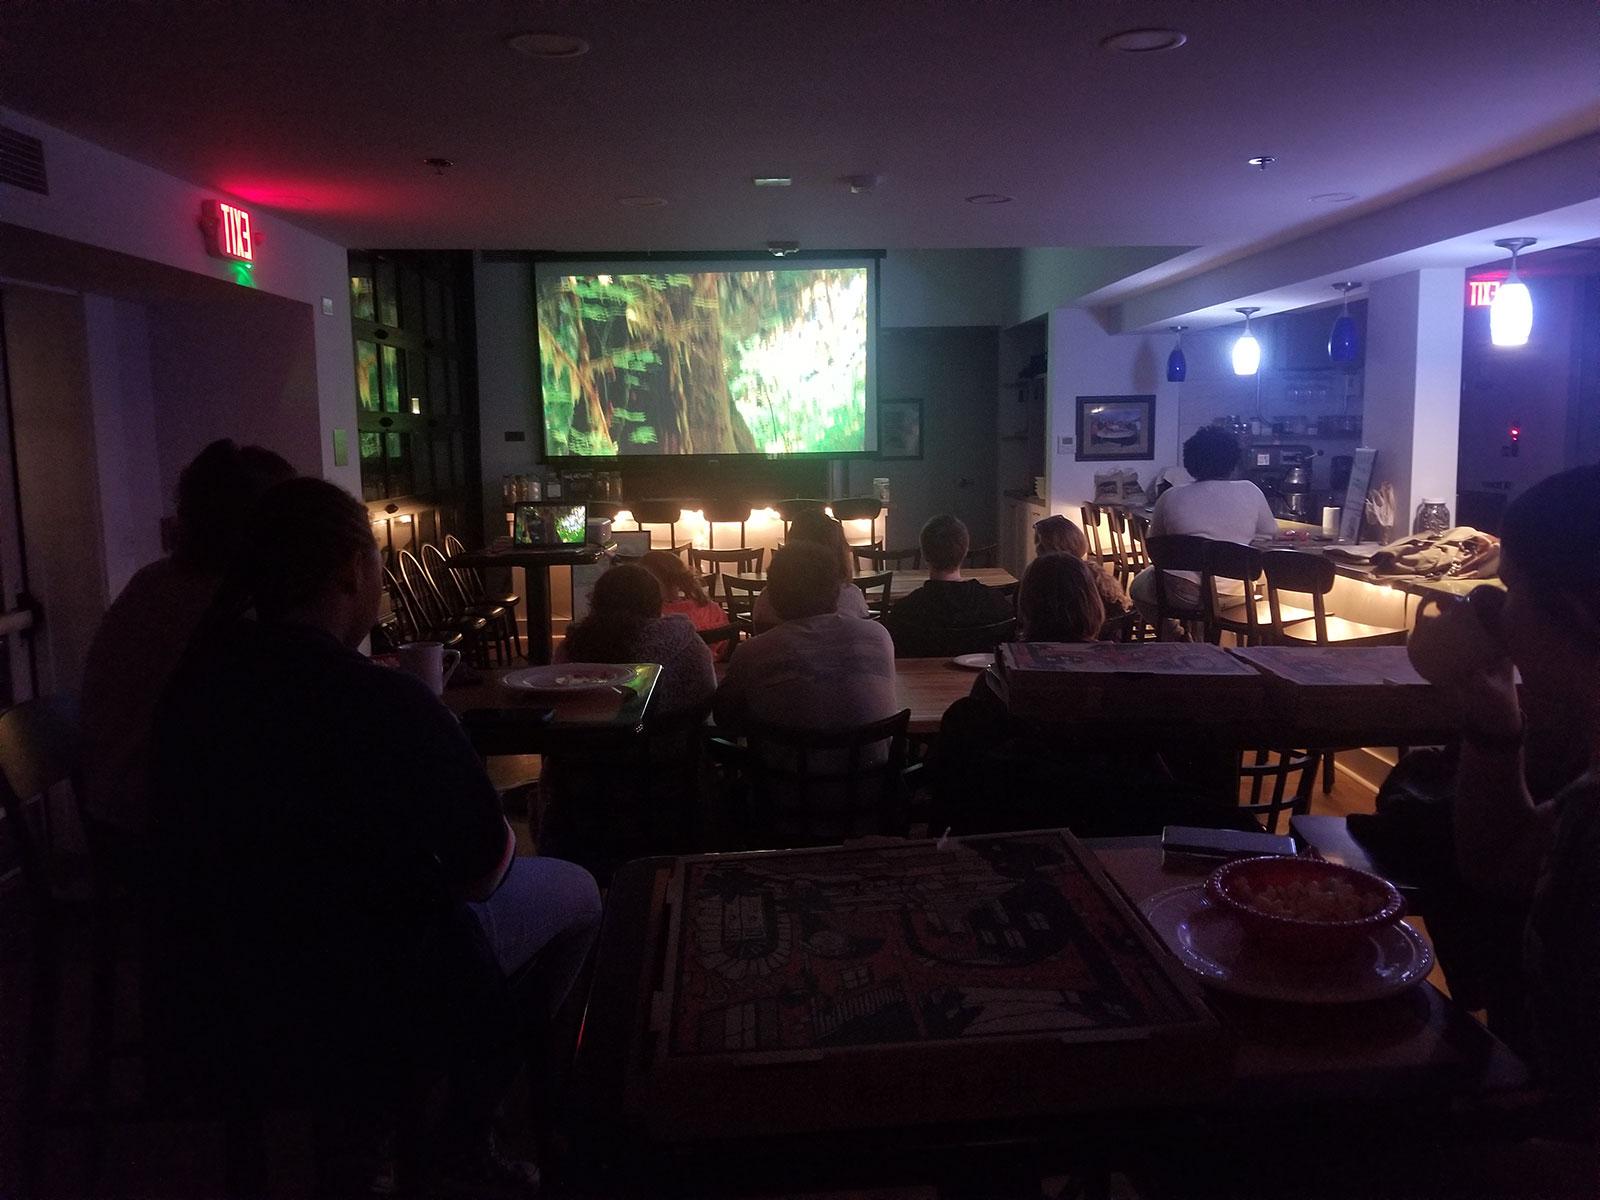 A screening of 污垢! 的 Movie in the Food Lab gets builds excitement about the importance of composting.